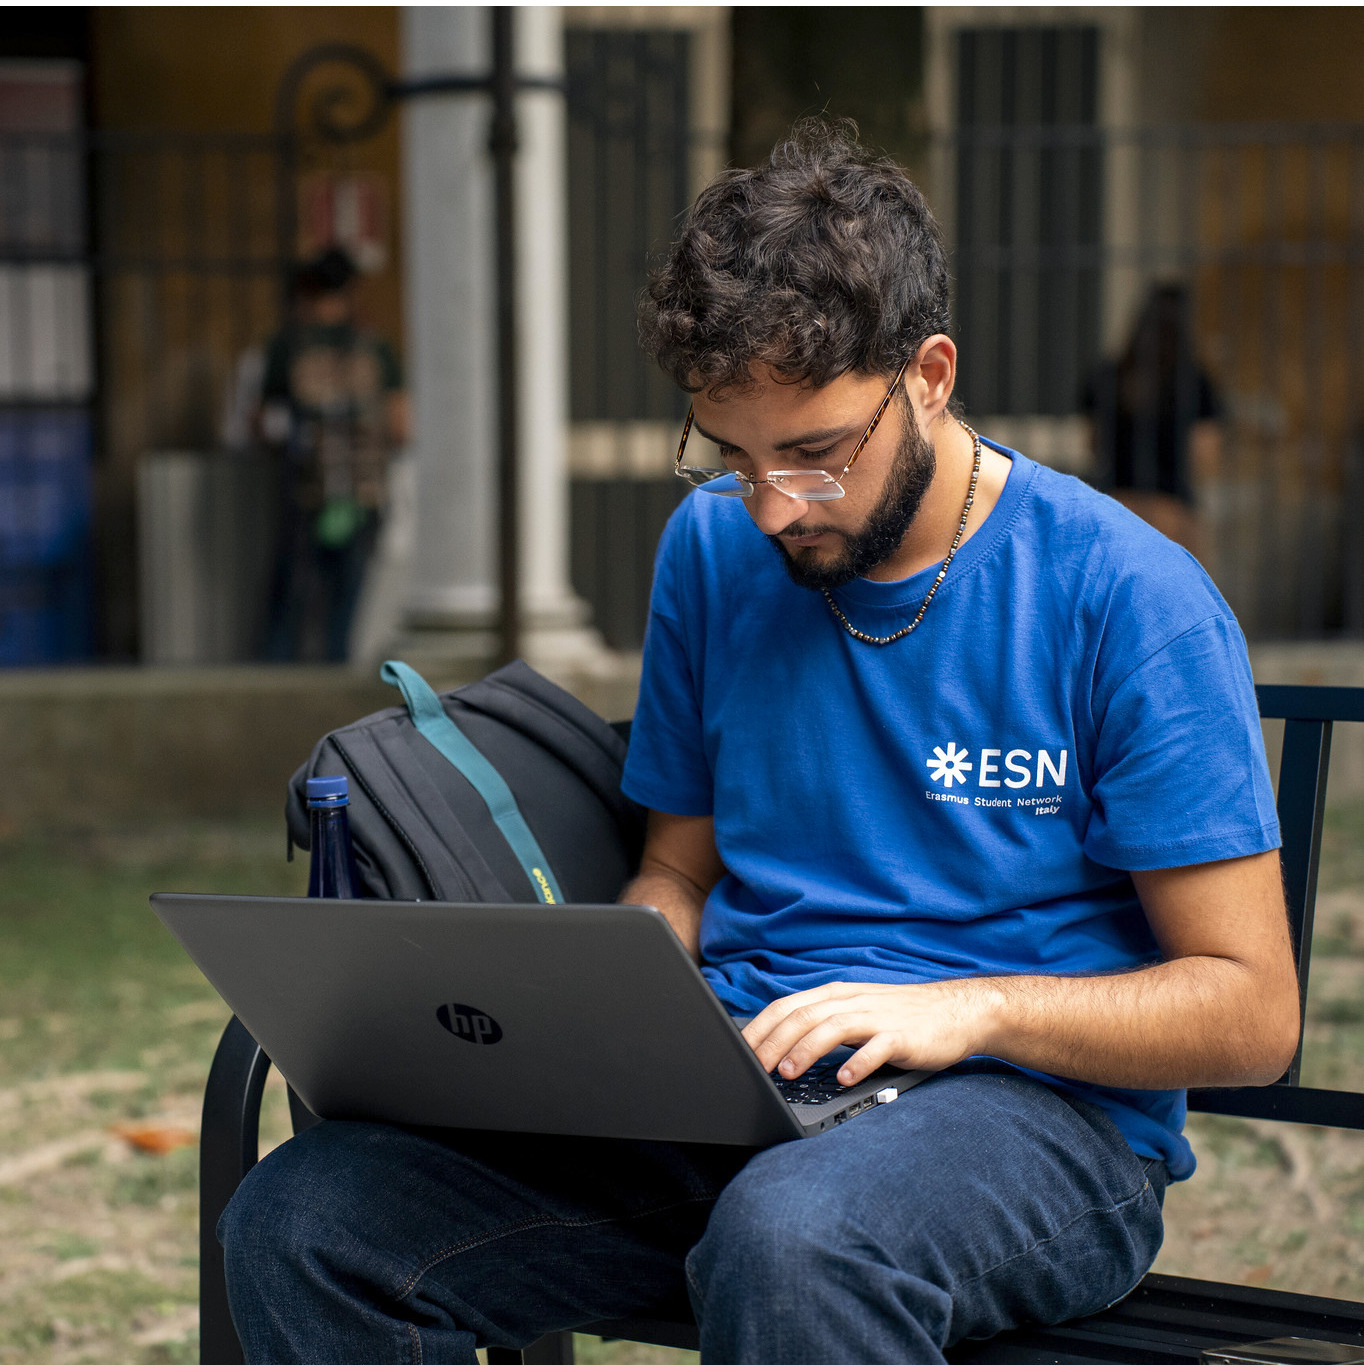 Image of a person outside typing on a laptop.